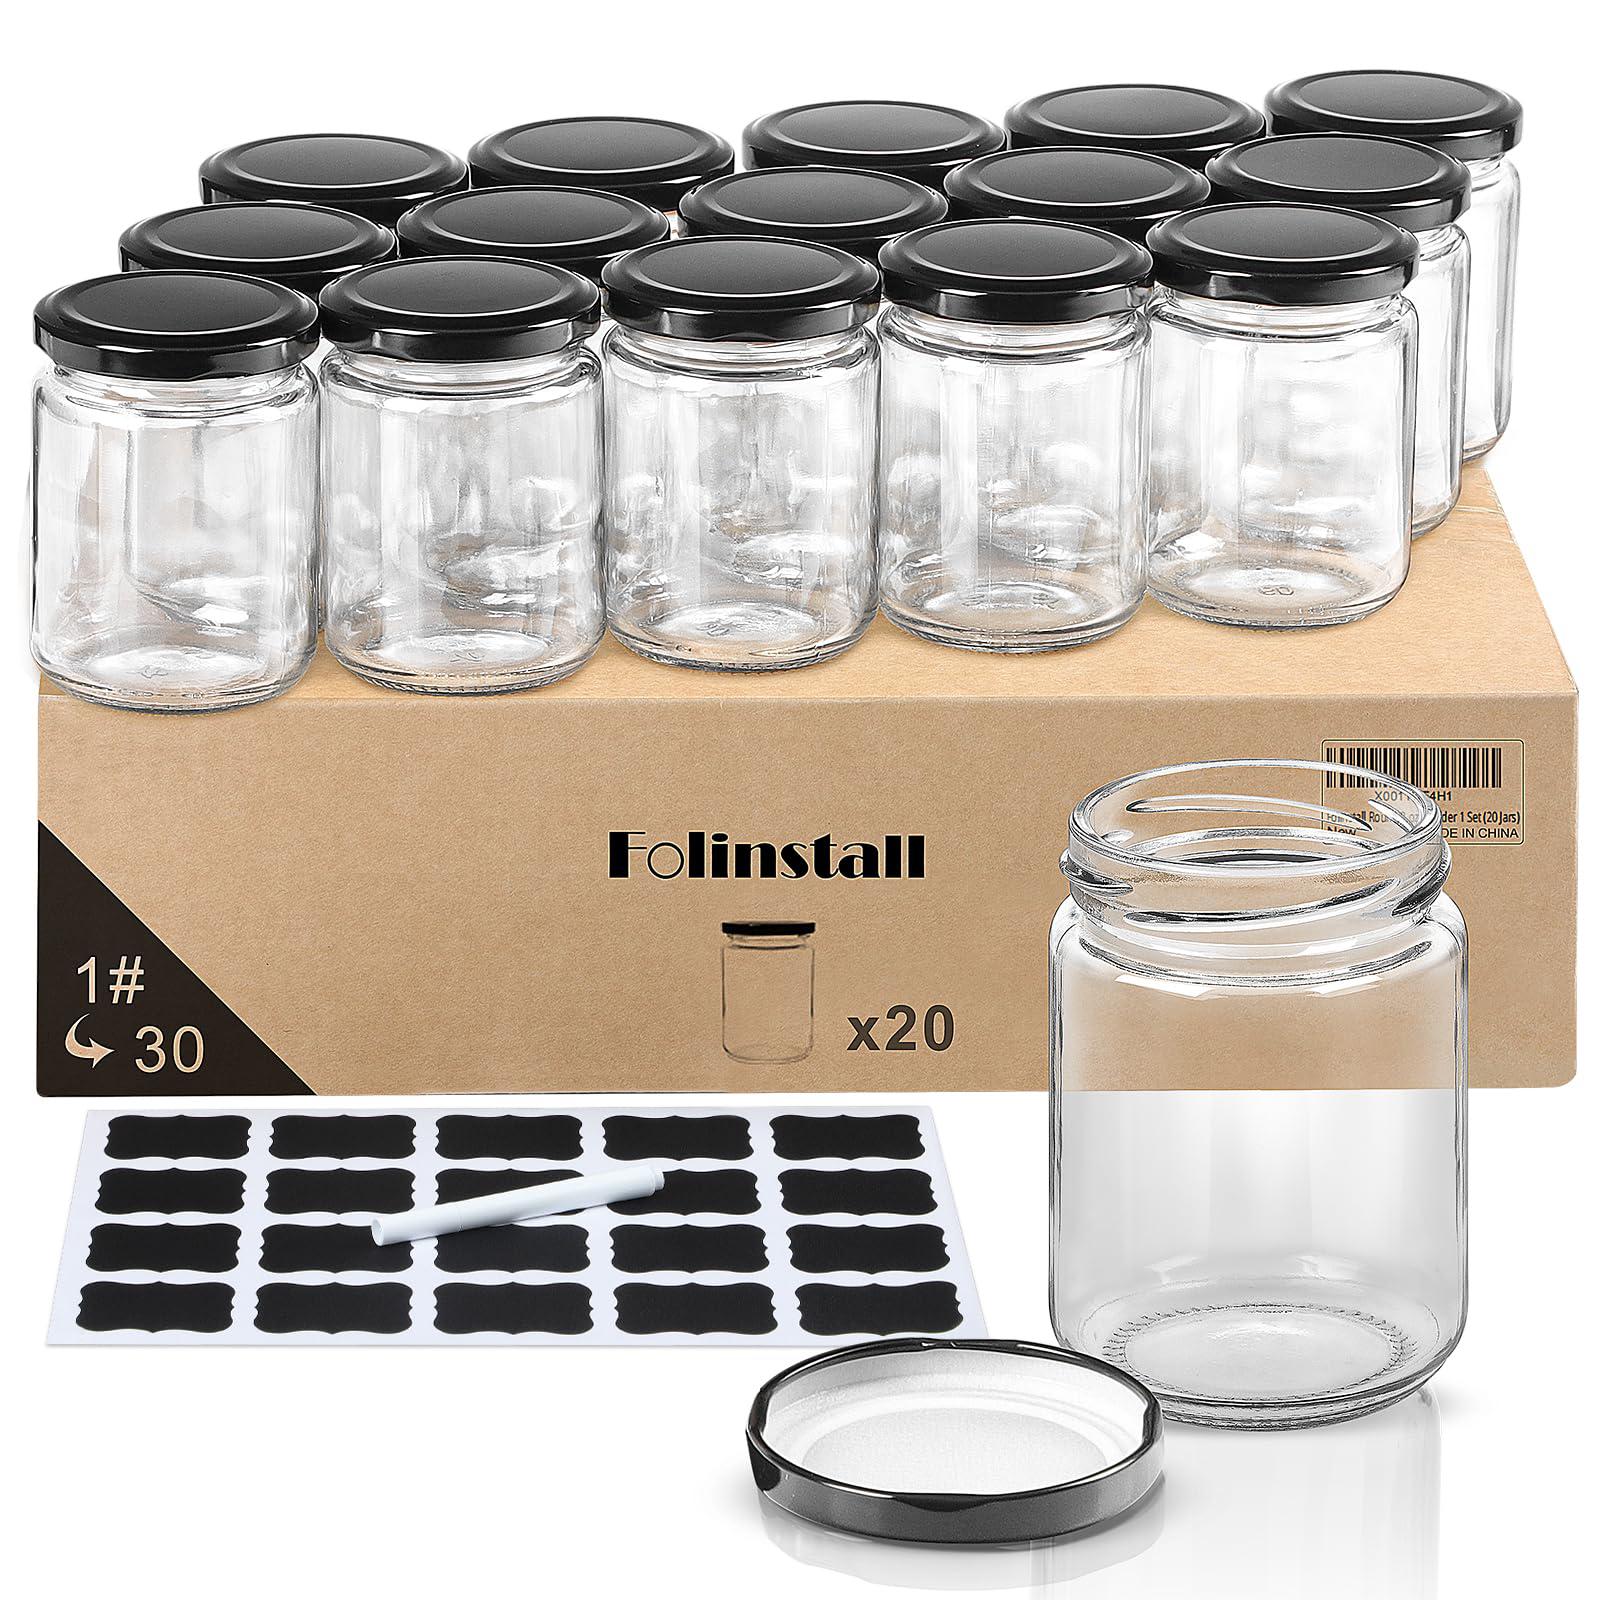 Folinstall folinstall 8 oz small glass jars with airtight lids, 20 pcs  empty candle jars for candle making, glass food storage jars for